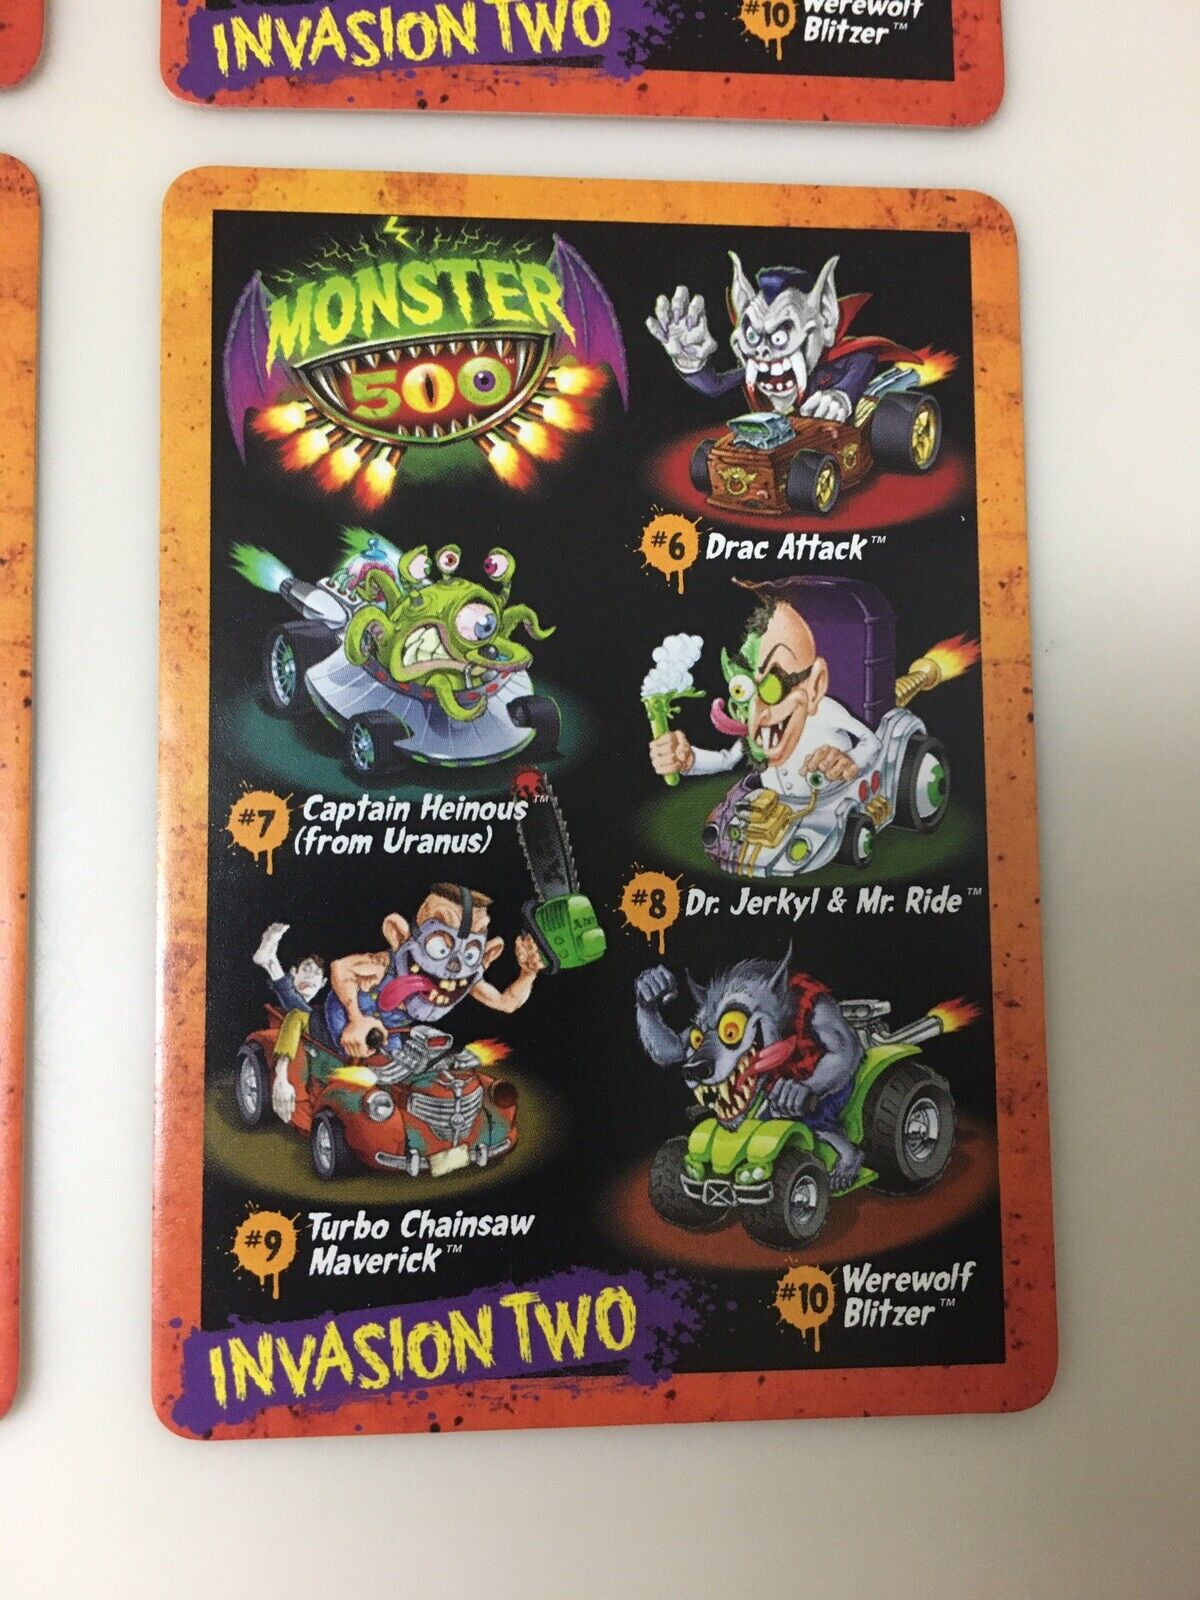 Monster 500 Promotional Card Lot of 4 cards Toys R Us Invasion Two Event  4 Same Monster 500 - фотография #2